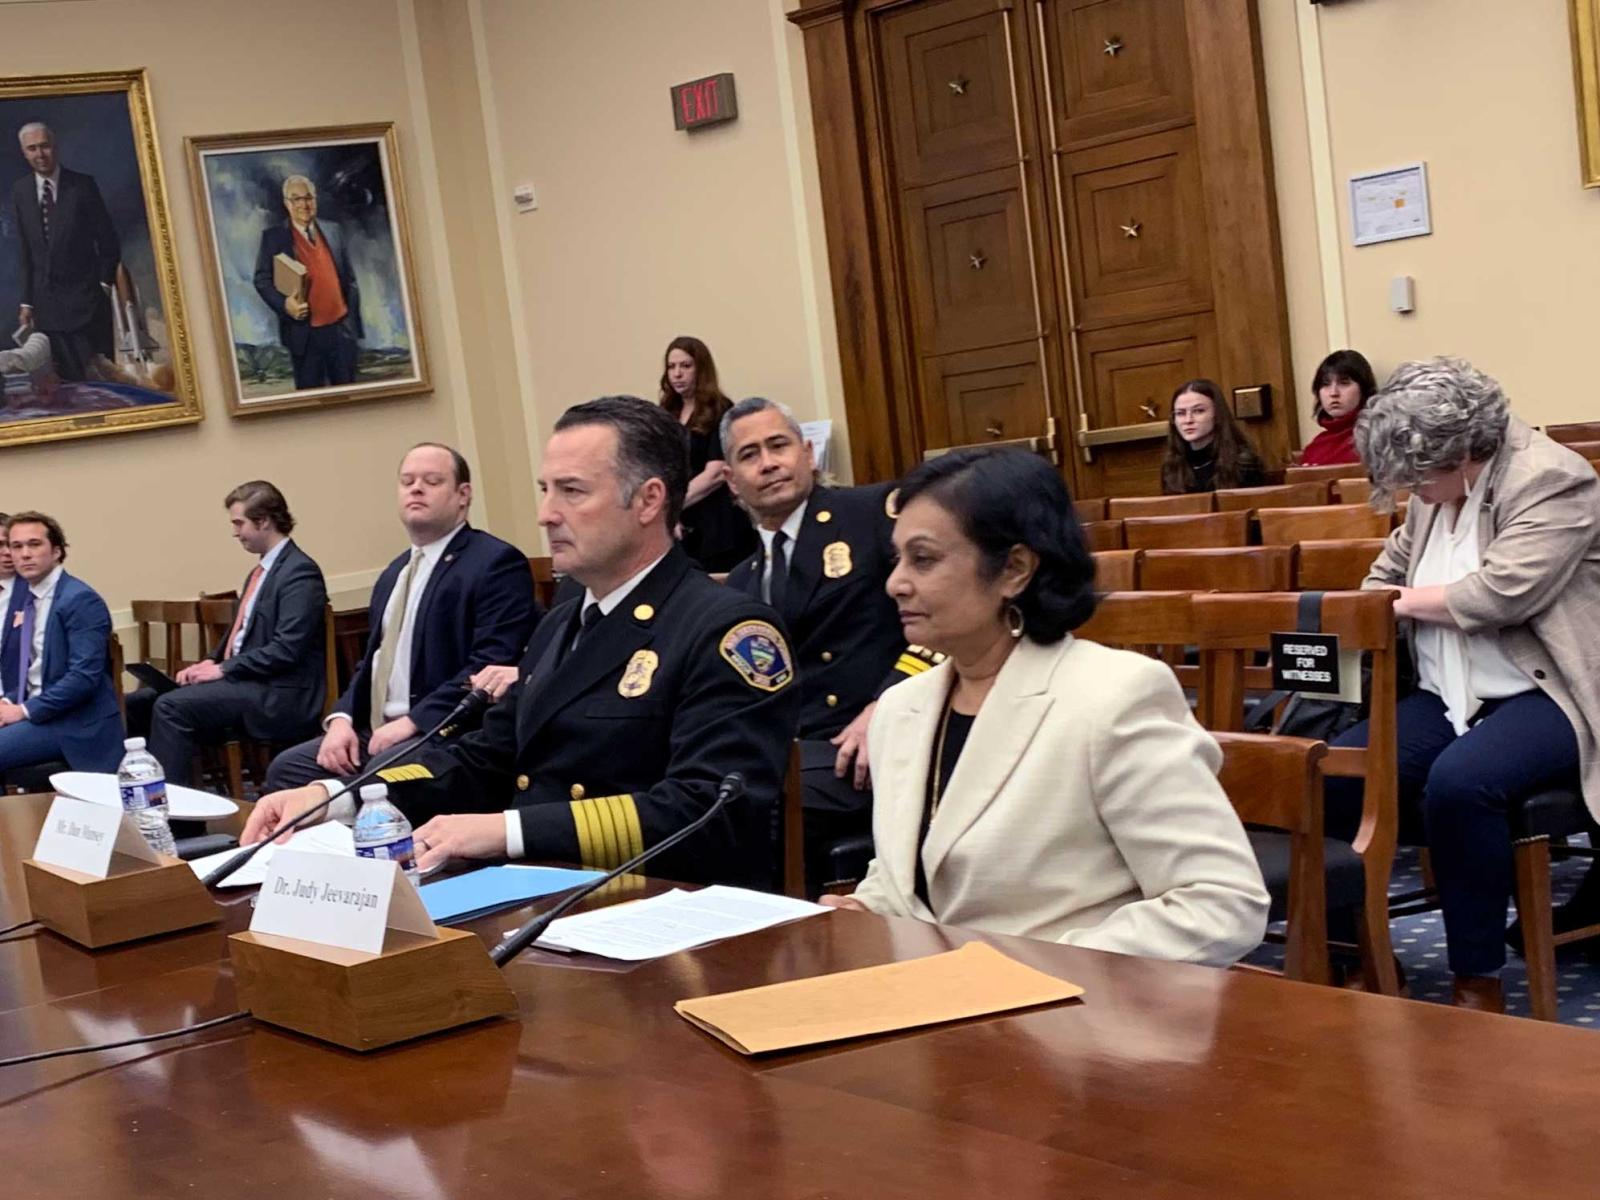 ESRI Executive Director Judy Jeevarajan, at right, and San Bernardino County Fire Chief Dan Munsey testify at a U.S. House Science, Space, and Technology subcommittee hearing on emerging electric vehicle fire concerns.